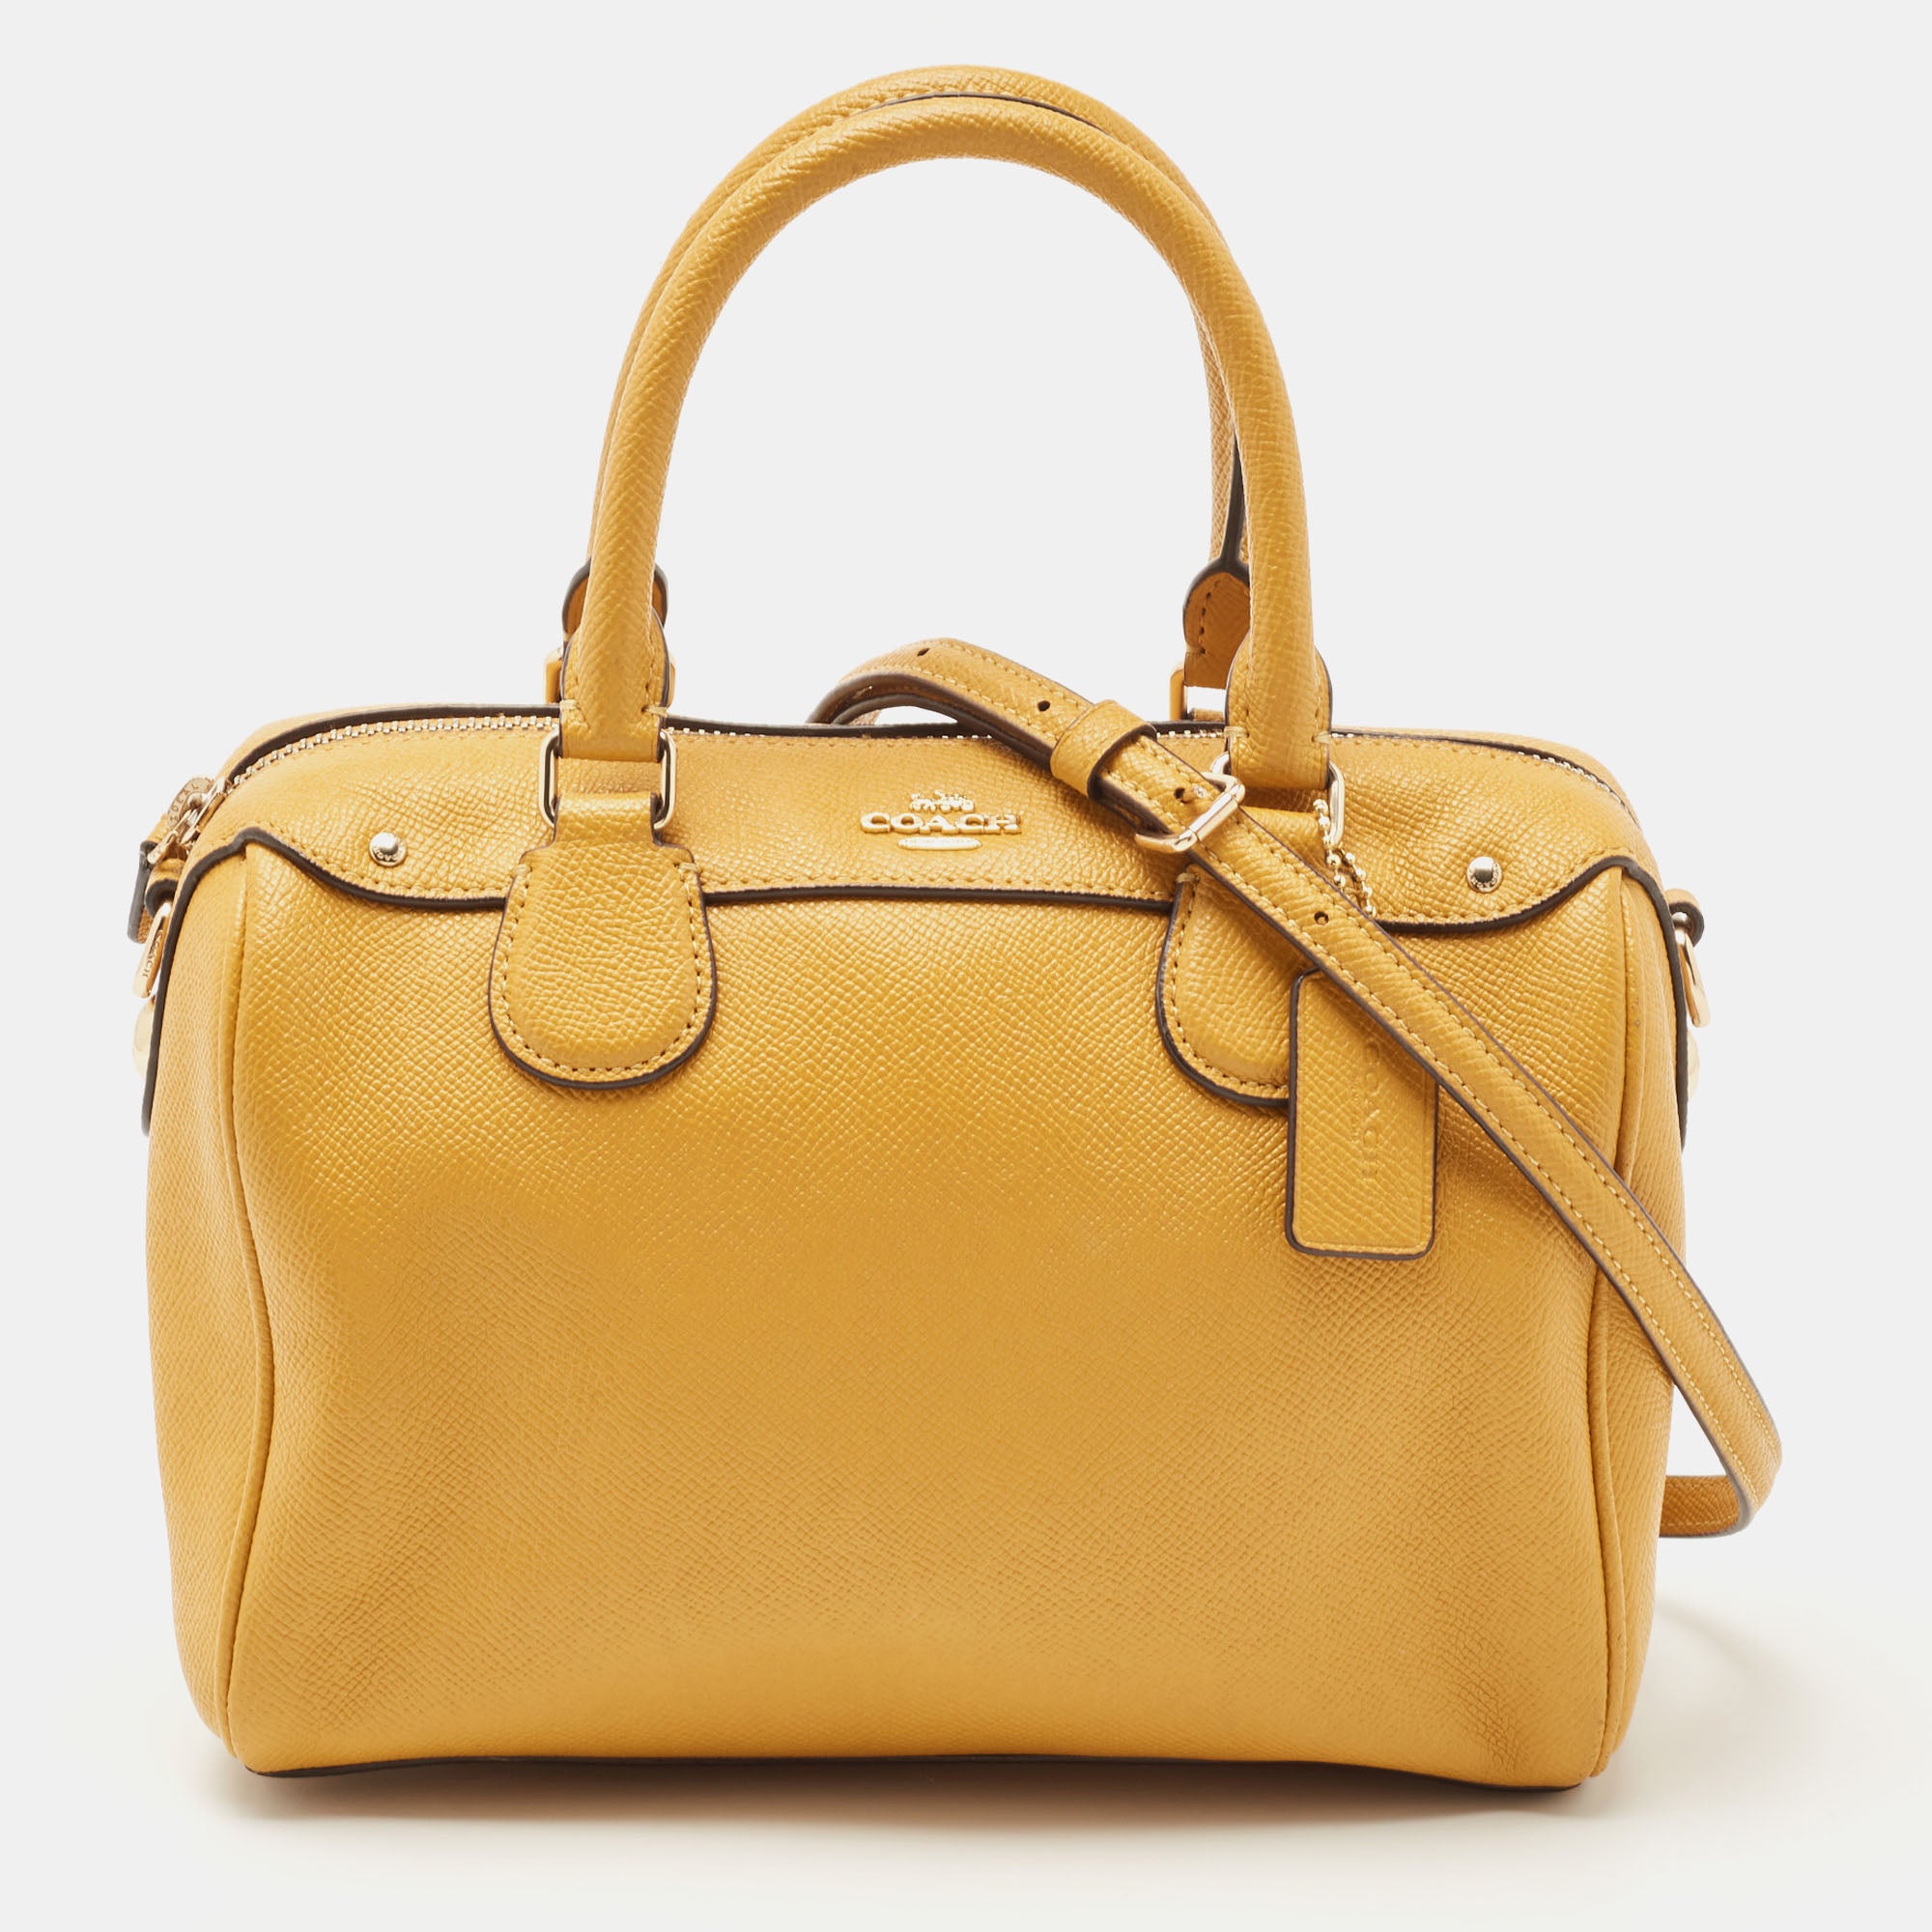 Pre-owned Coach Mustard Yellow Leather Mini Bennett Satchel